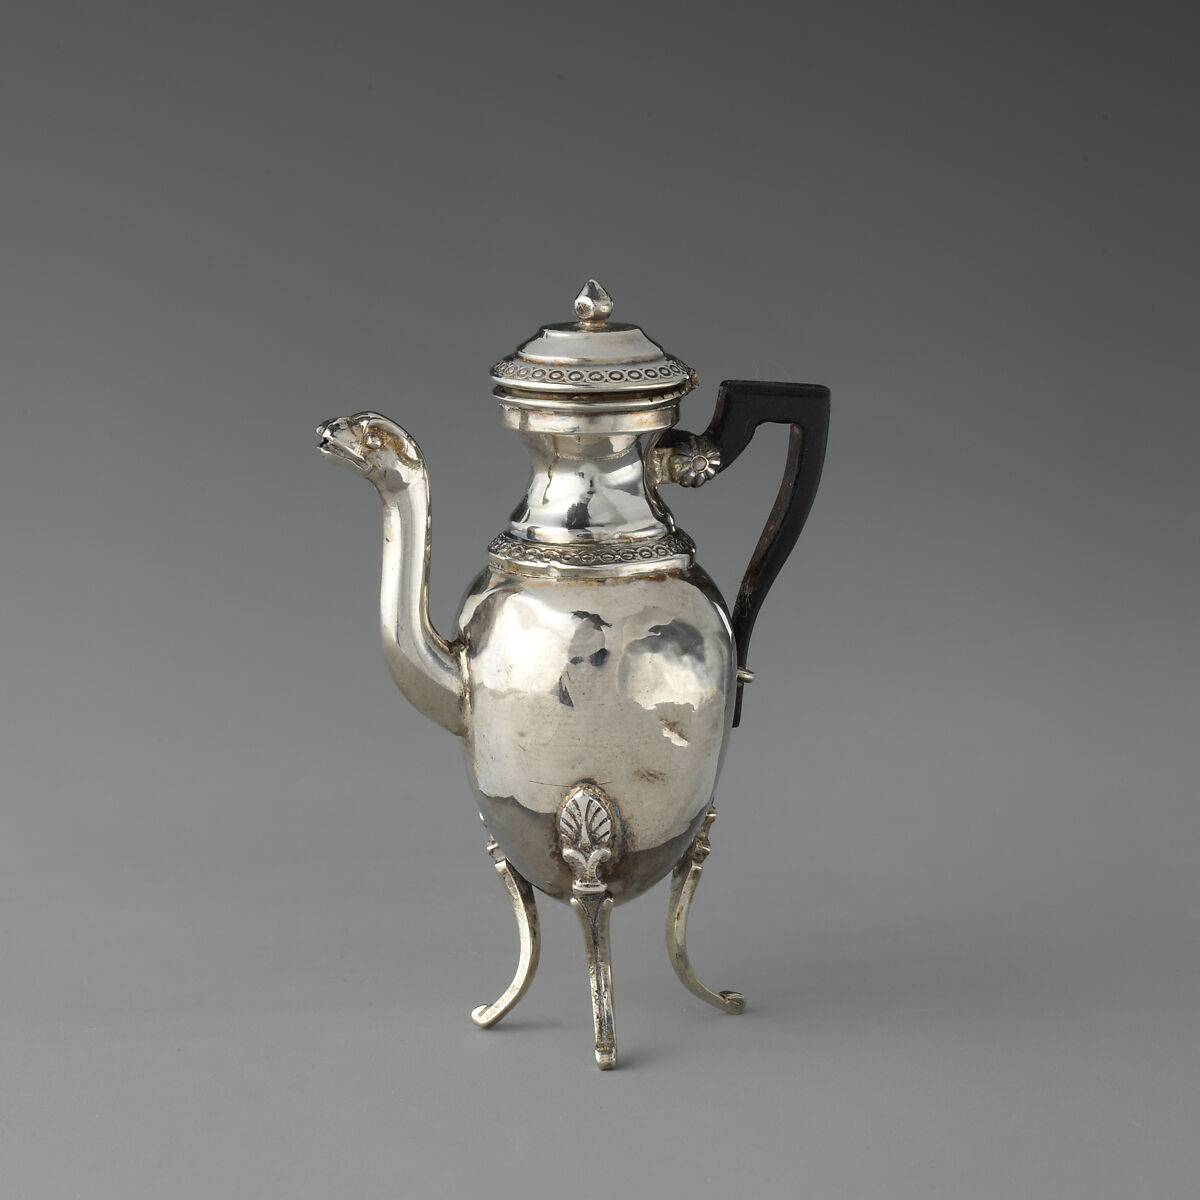 Miniature coffeepot, Silver, wood, French 